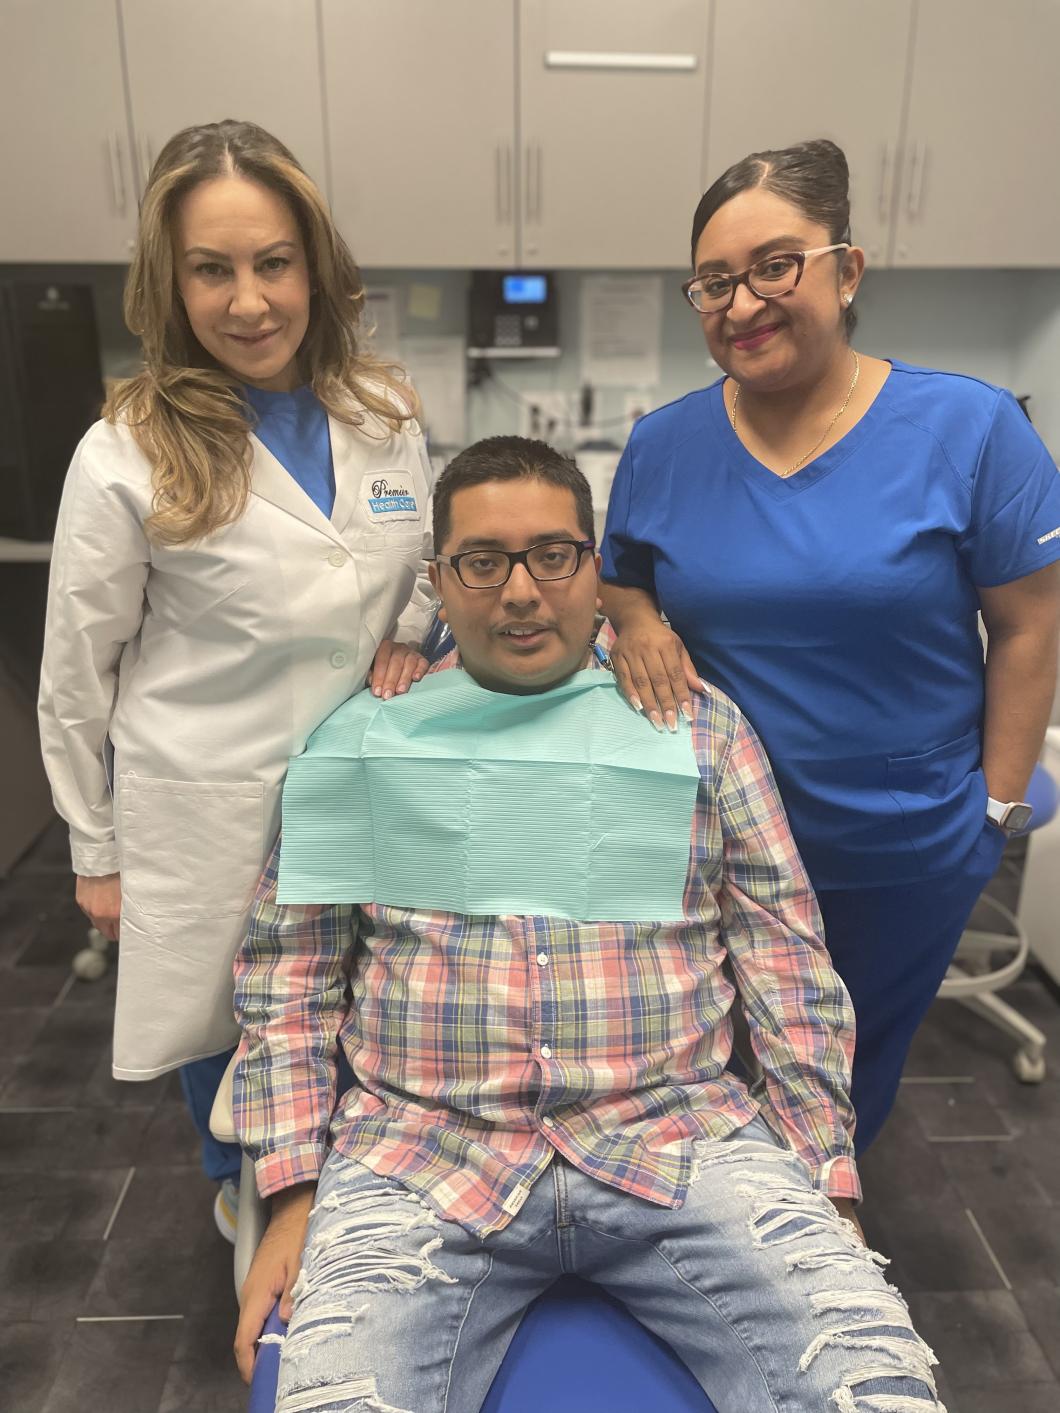 Kelvin poses in the dental chair with the dentist and clinician standing behind him on either side.